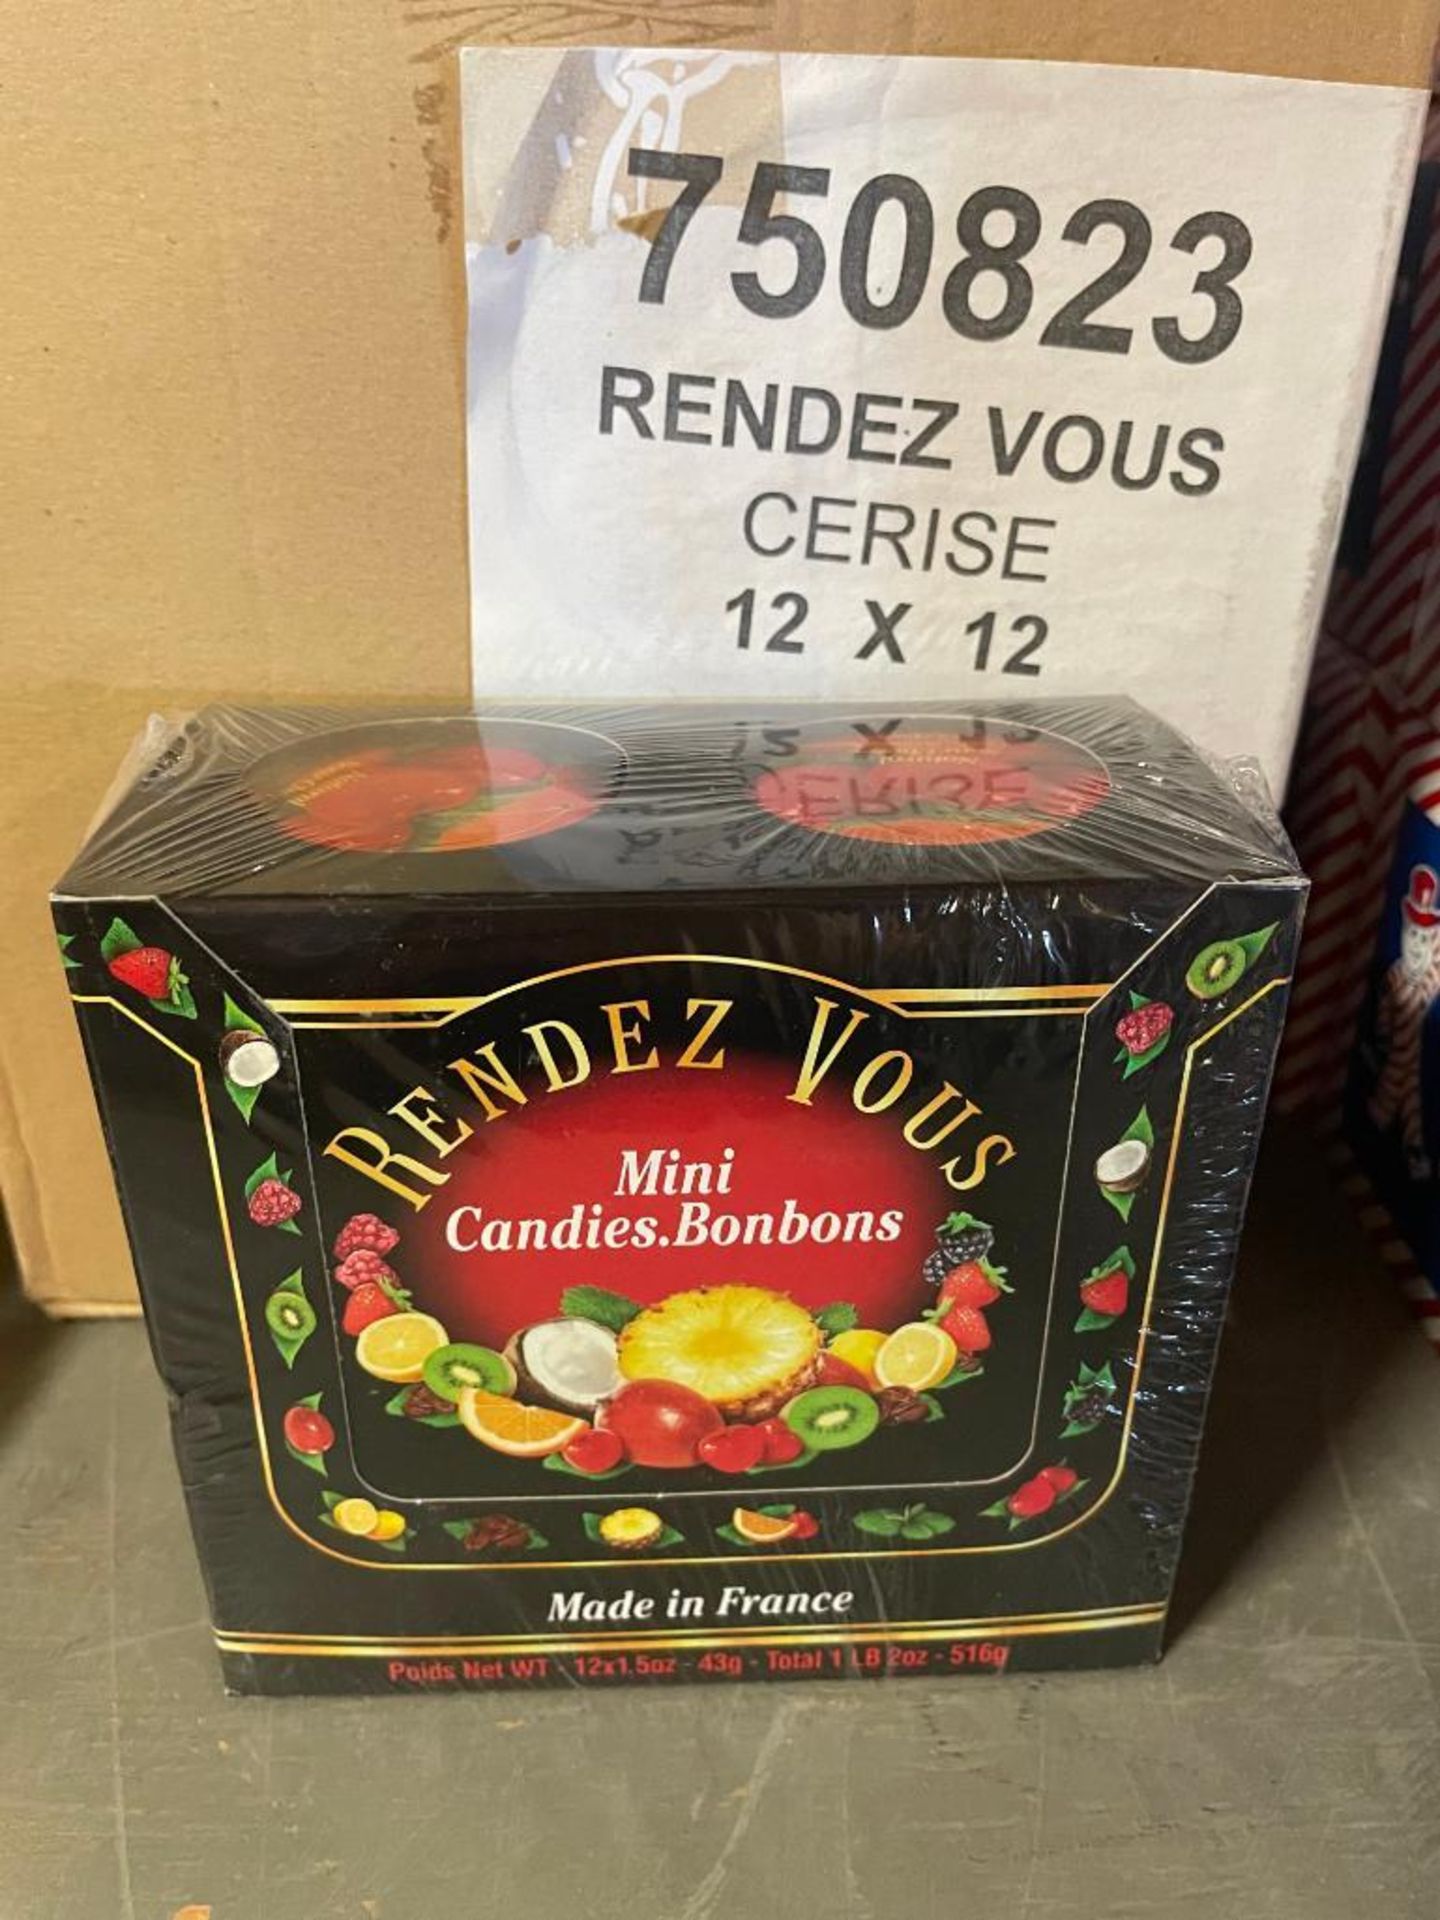 (156) TINS OF RENDEZ VOUS NATURAL SOUR CHERRY MINI CANDIES, MADE IN FRANCE, 43G/TIN - Image 2 of 3